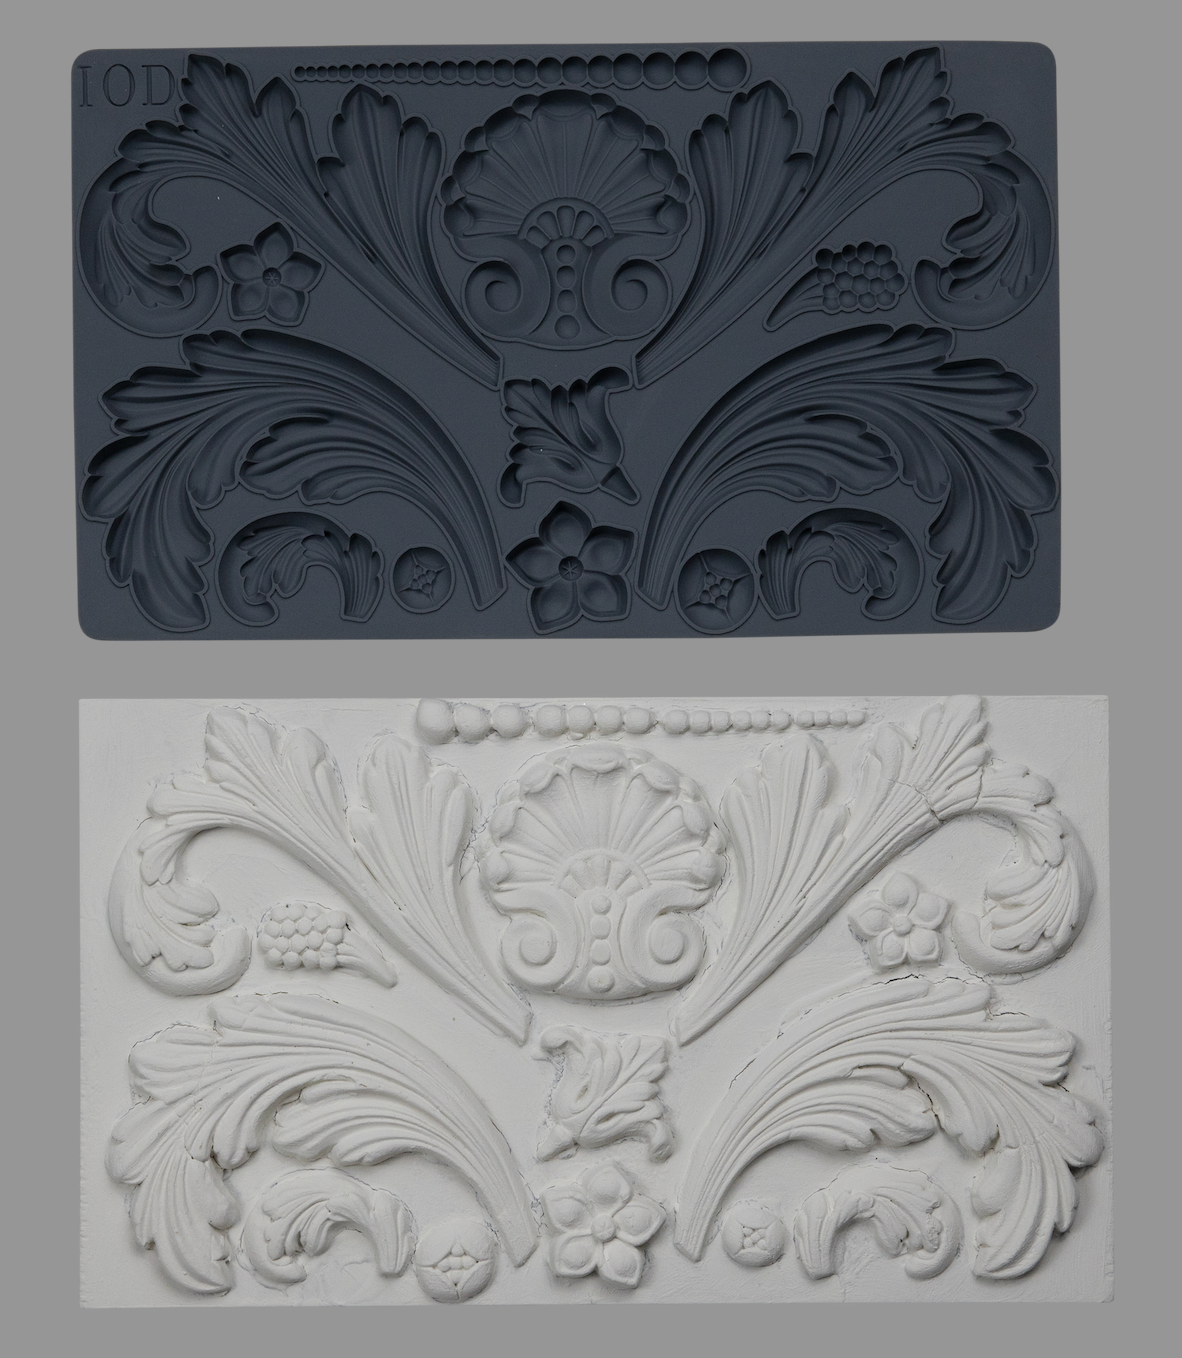 Acanthus Scroll - IOD Mould